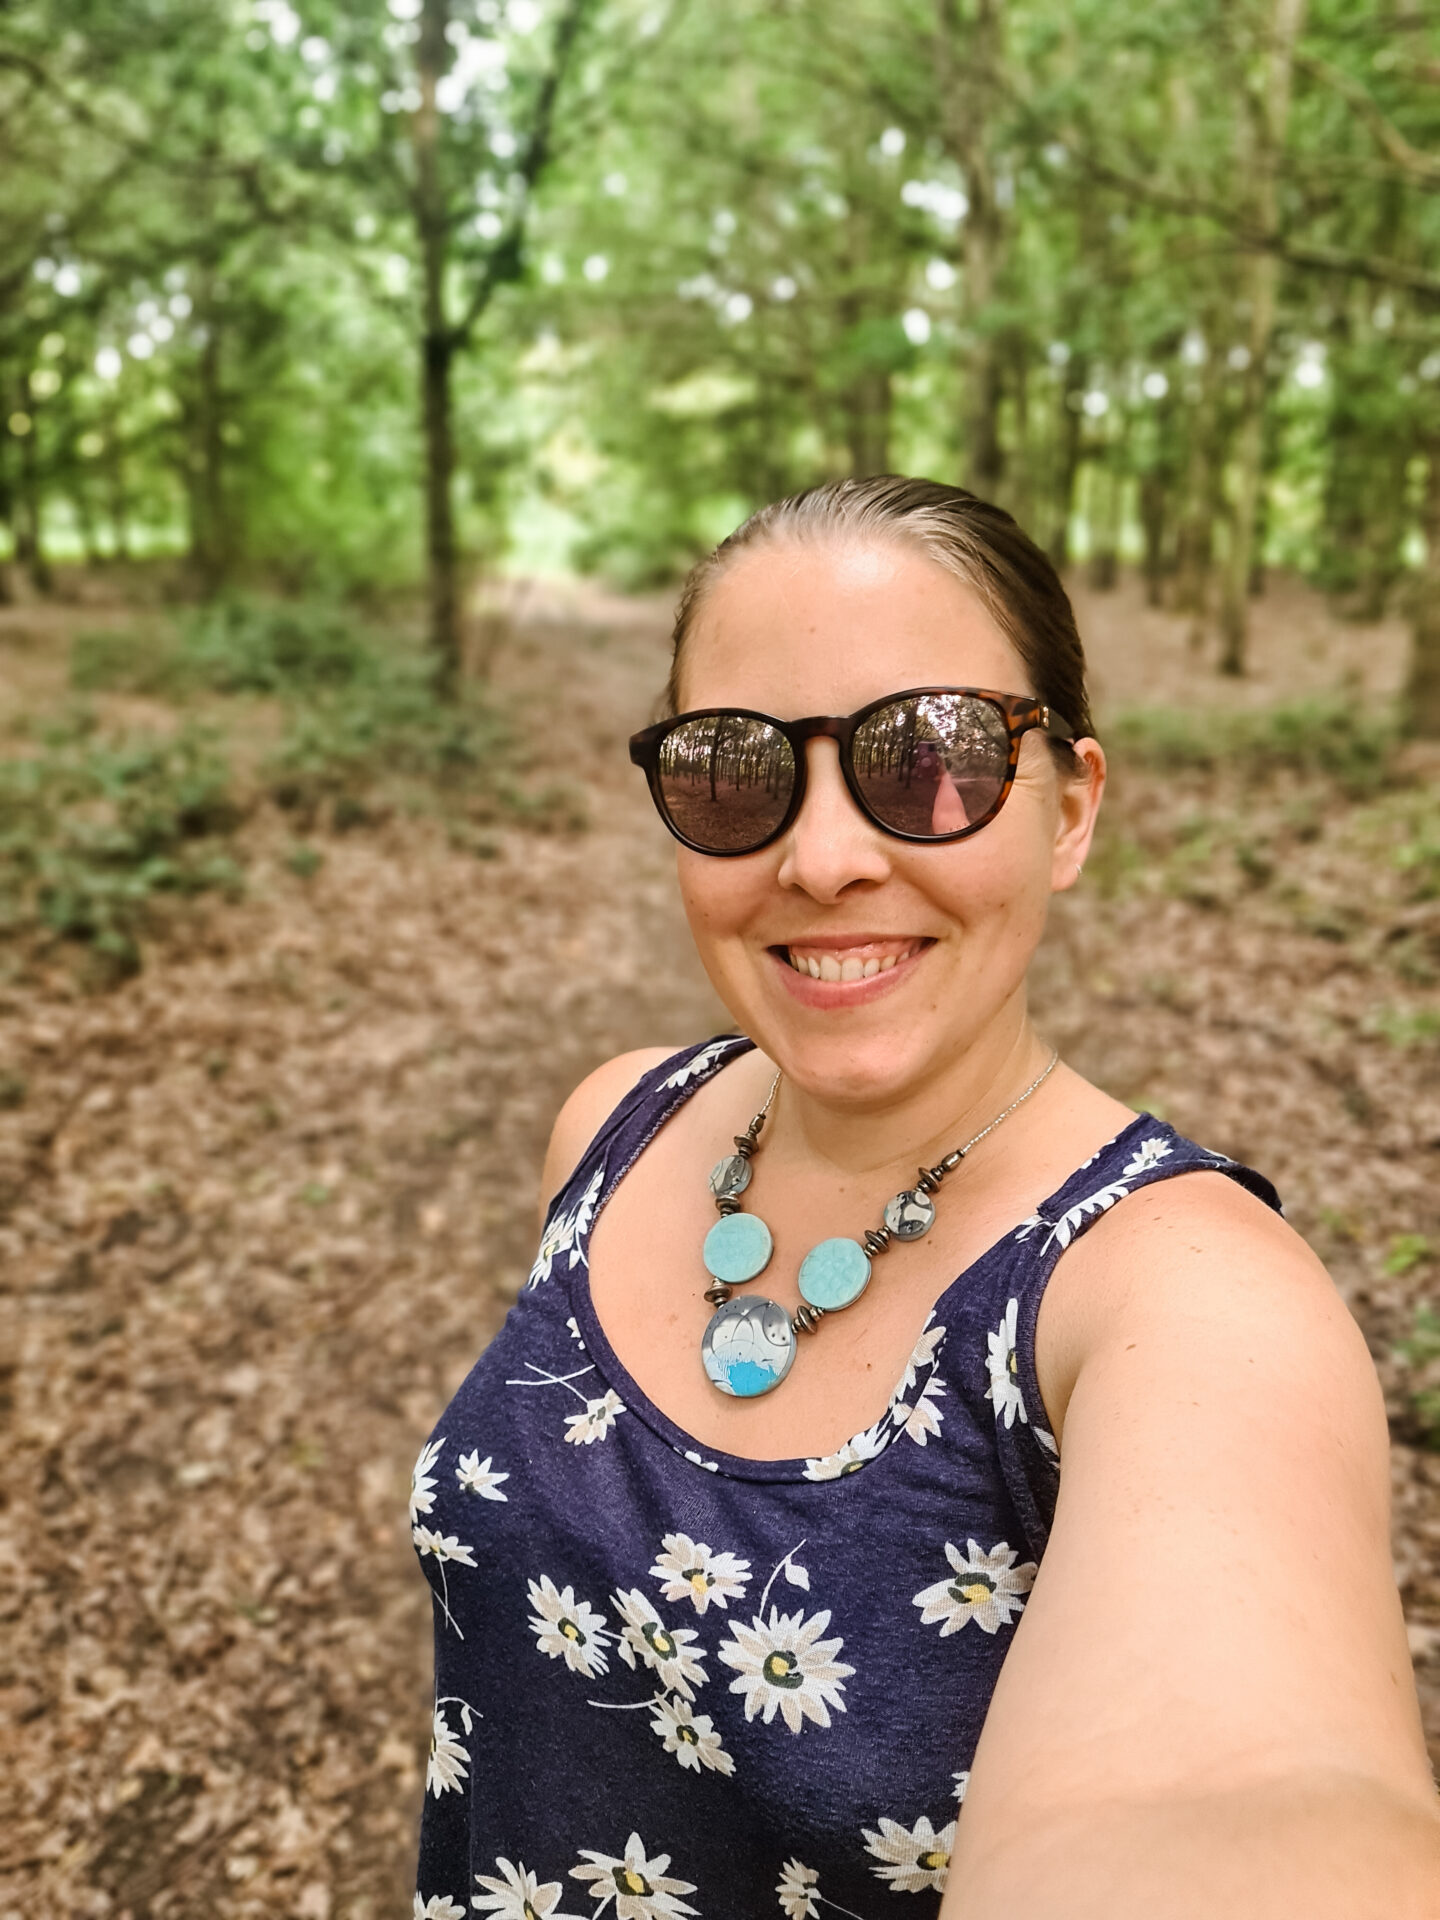 image of a woman wearing sunglasses and blue top with white daisies on it. She is smiling. Behind her is some trees in a wood